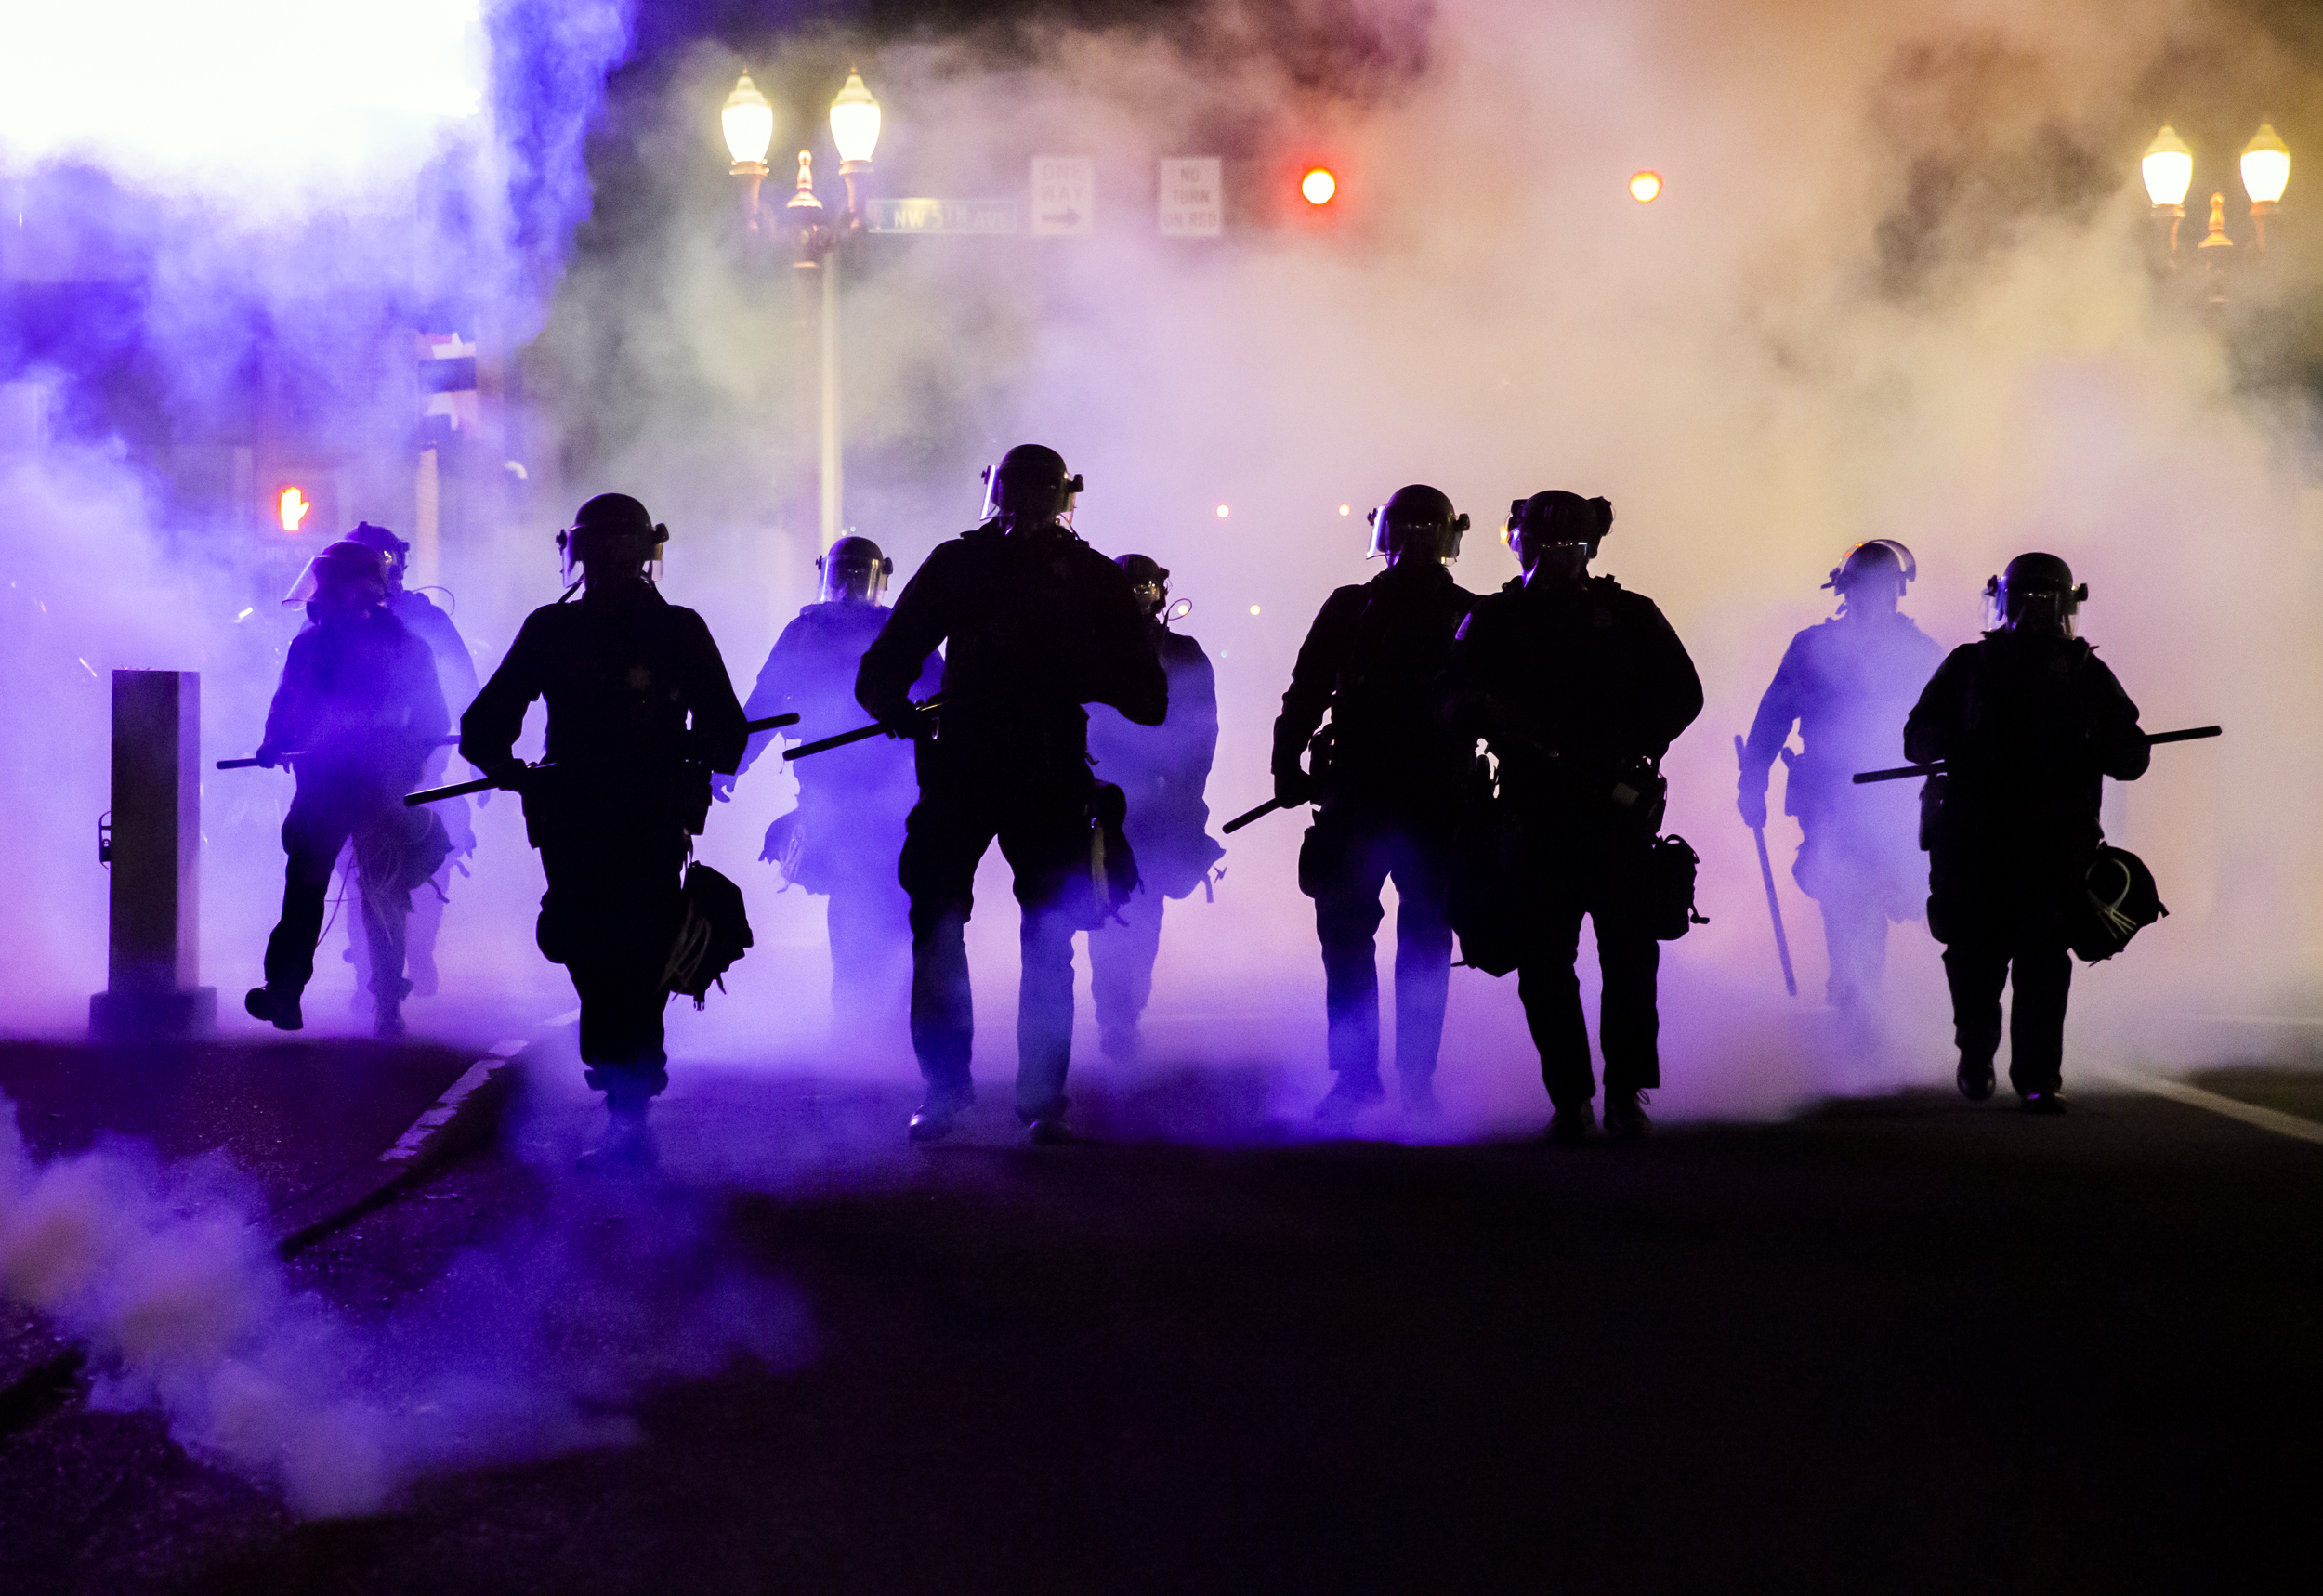 Police advance in a cloud of tear gas as Portlanders protest against the death of George Floyd, a black man killed by police in Minneapolis.  Dave Killen / Staff